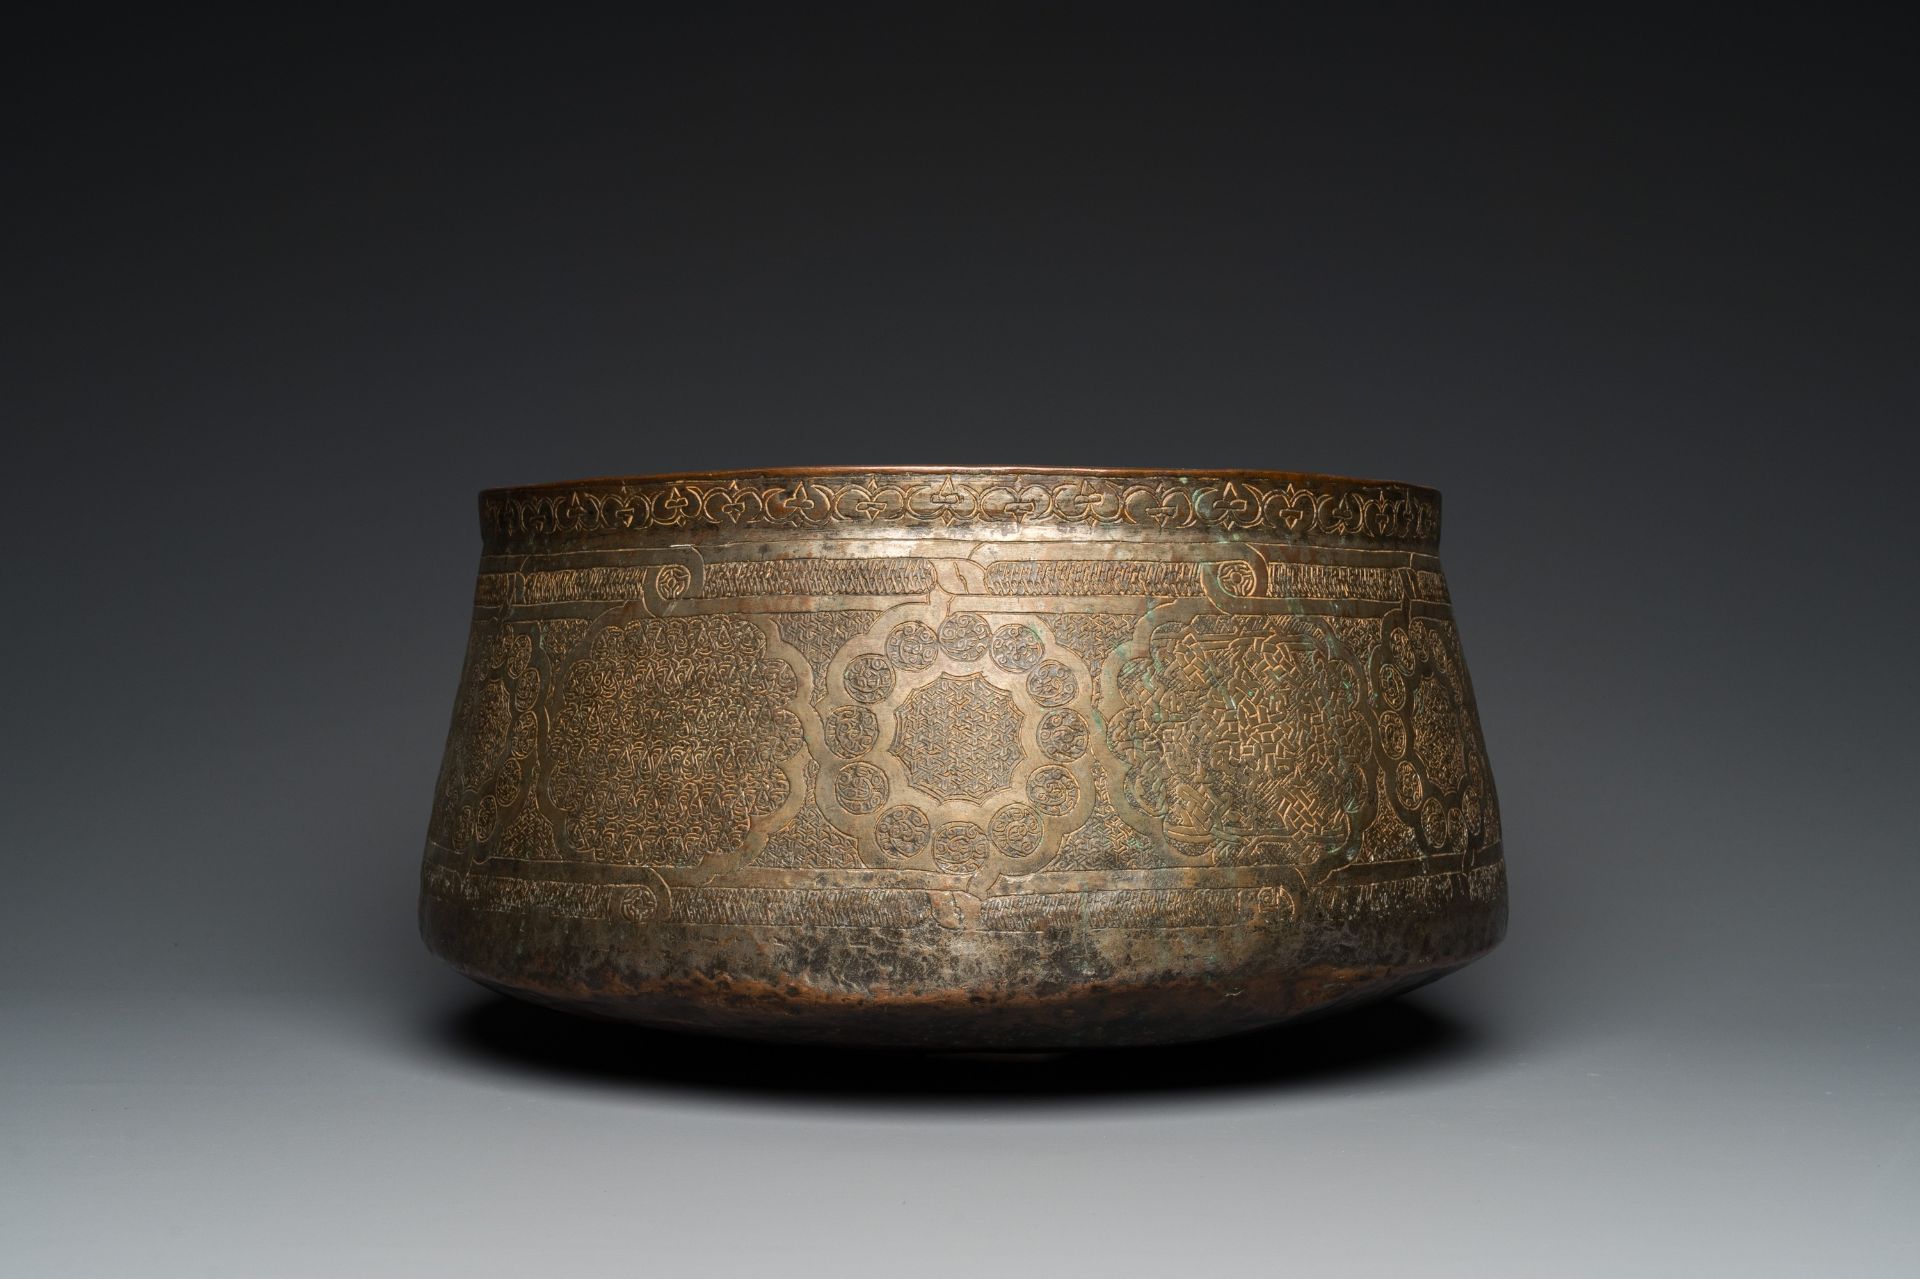 A large Islamic engraved bronze basin with calligraphic design, probably Egypt, 18/19th C. - Image 4 of 8